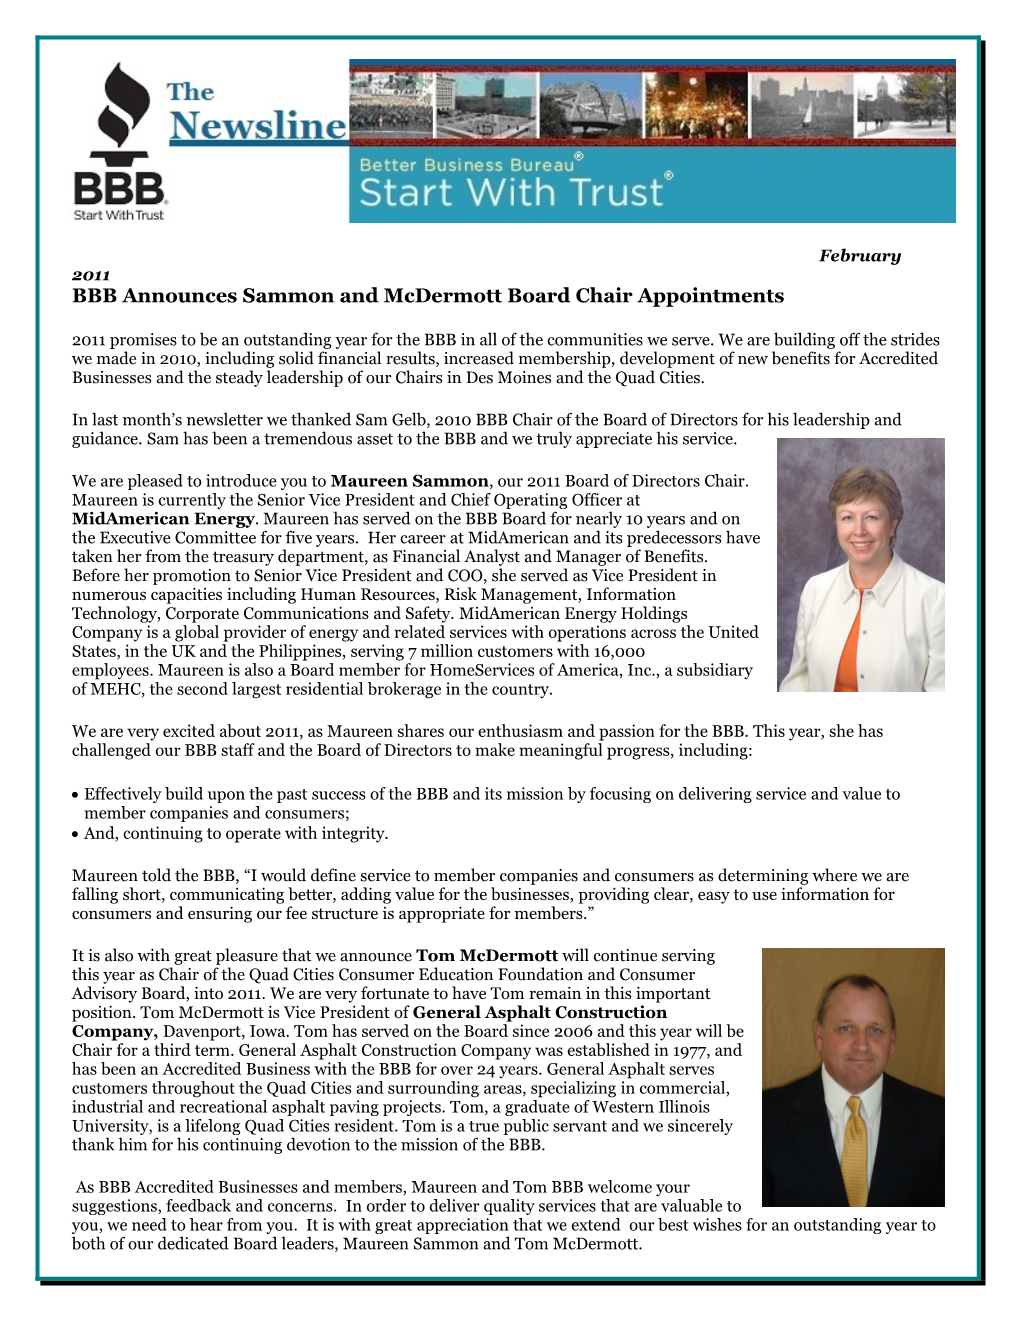 February 2011 BBB Announces Sammon and Mcdermott Board Chair Appointments